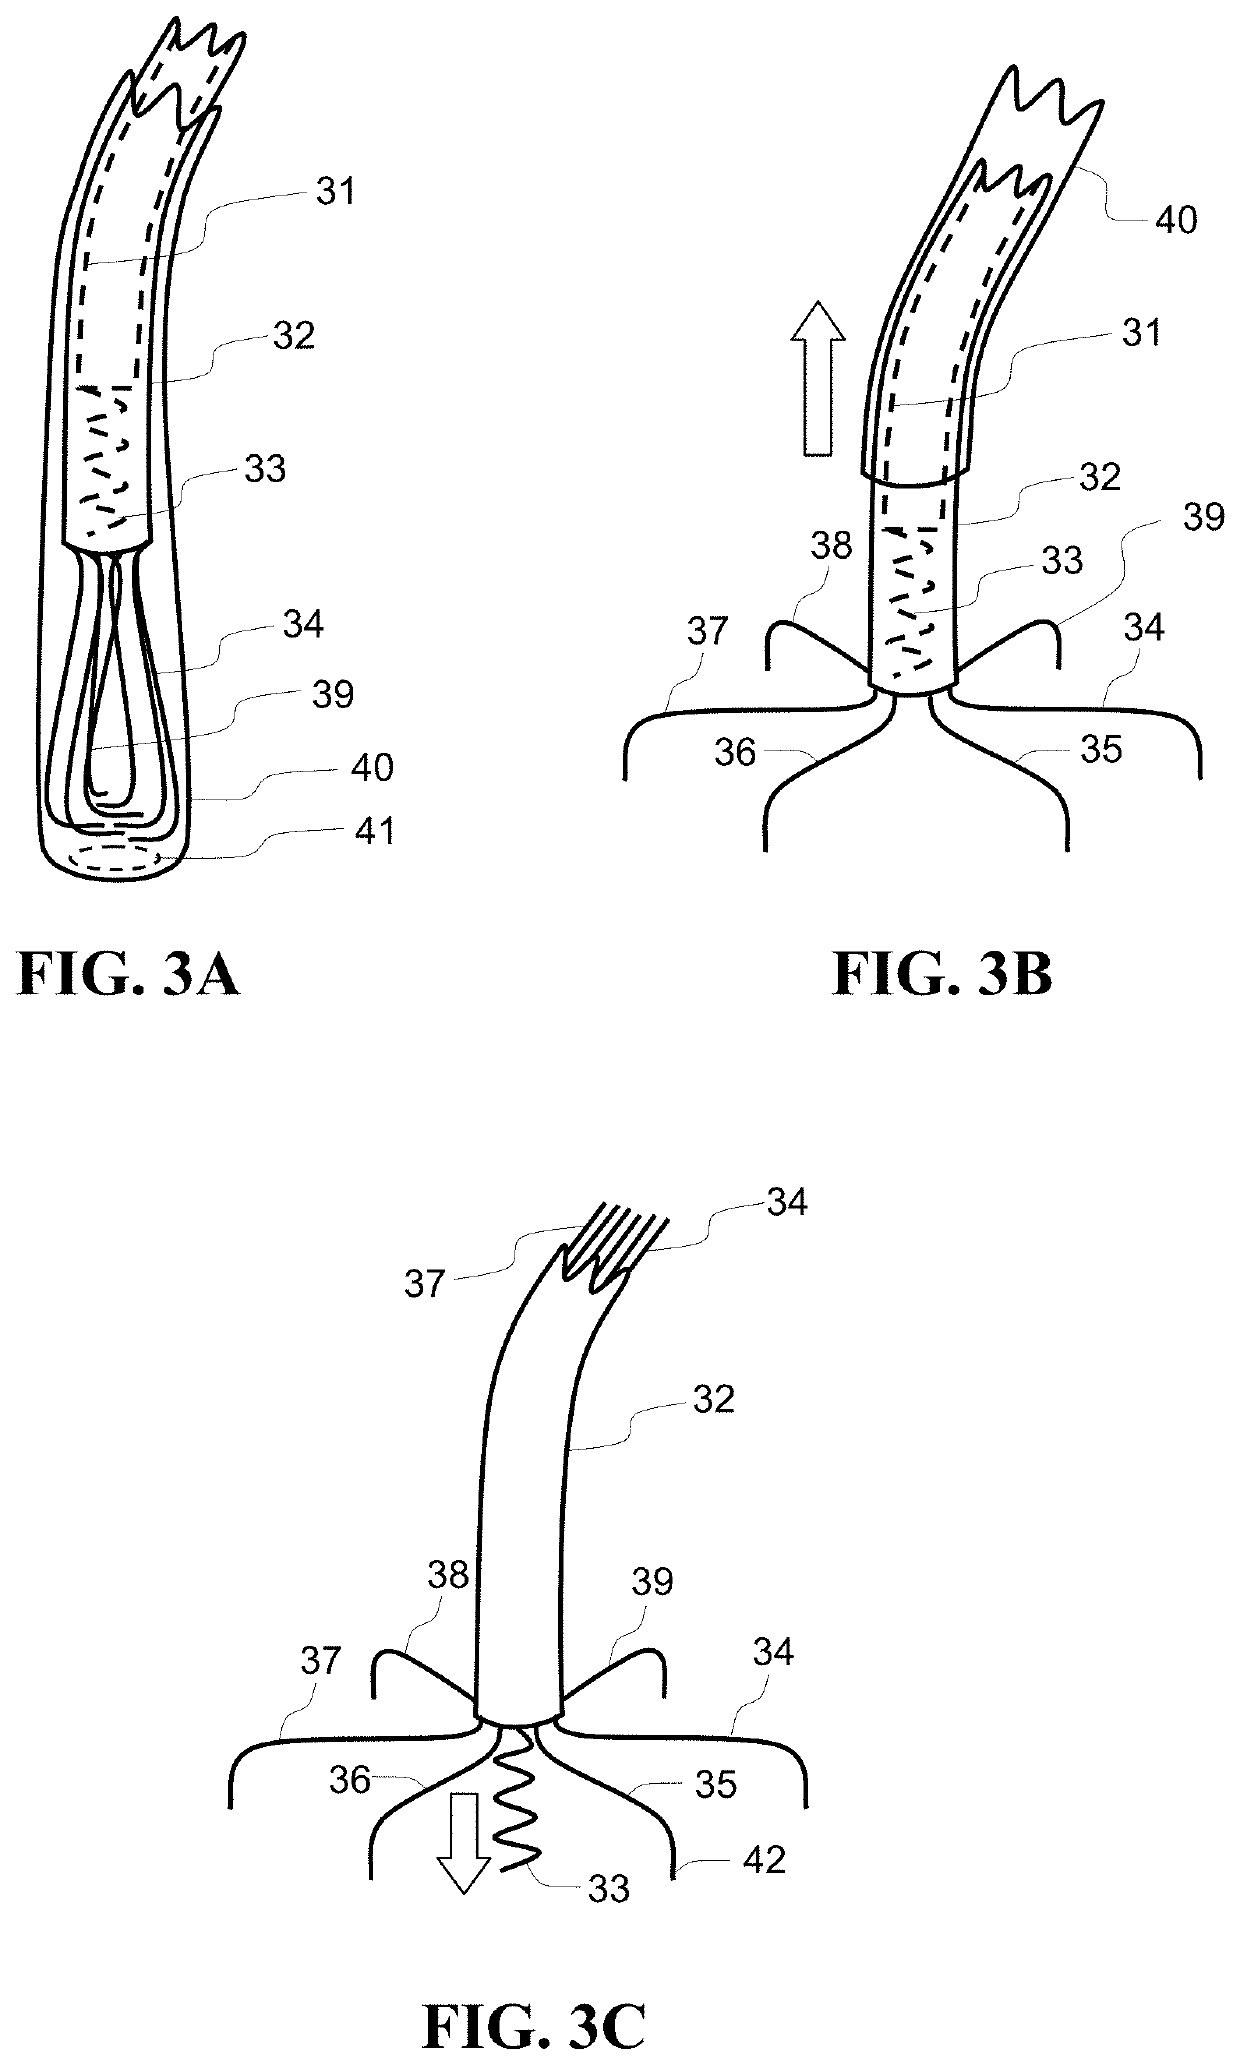 Single conduit multi-electrode cardiac pacemaker and methods of using thereof